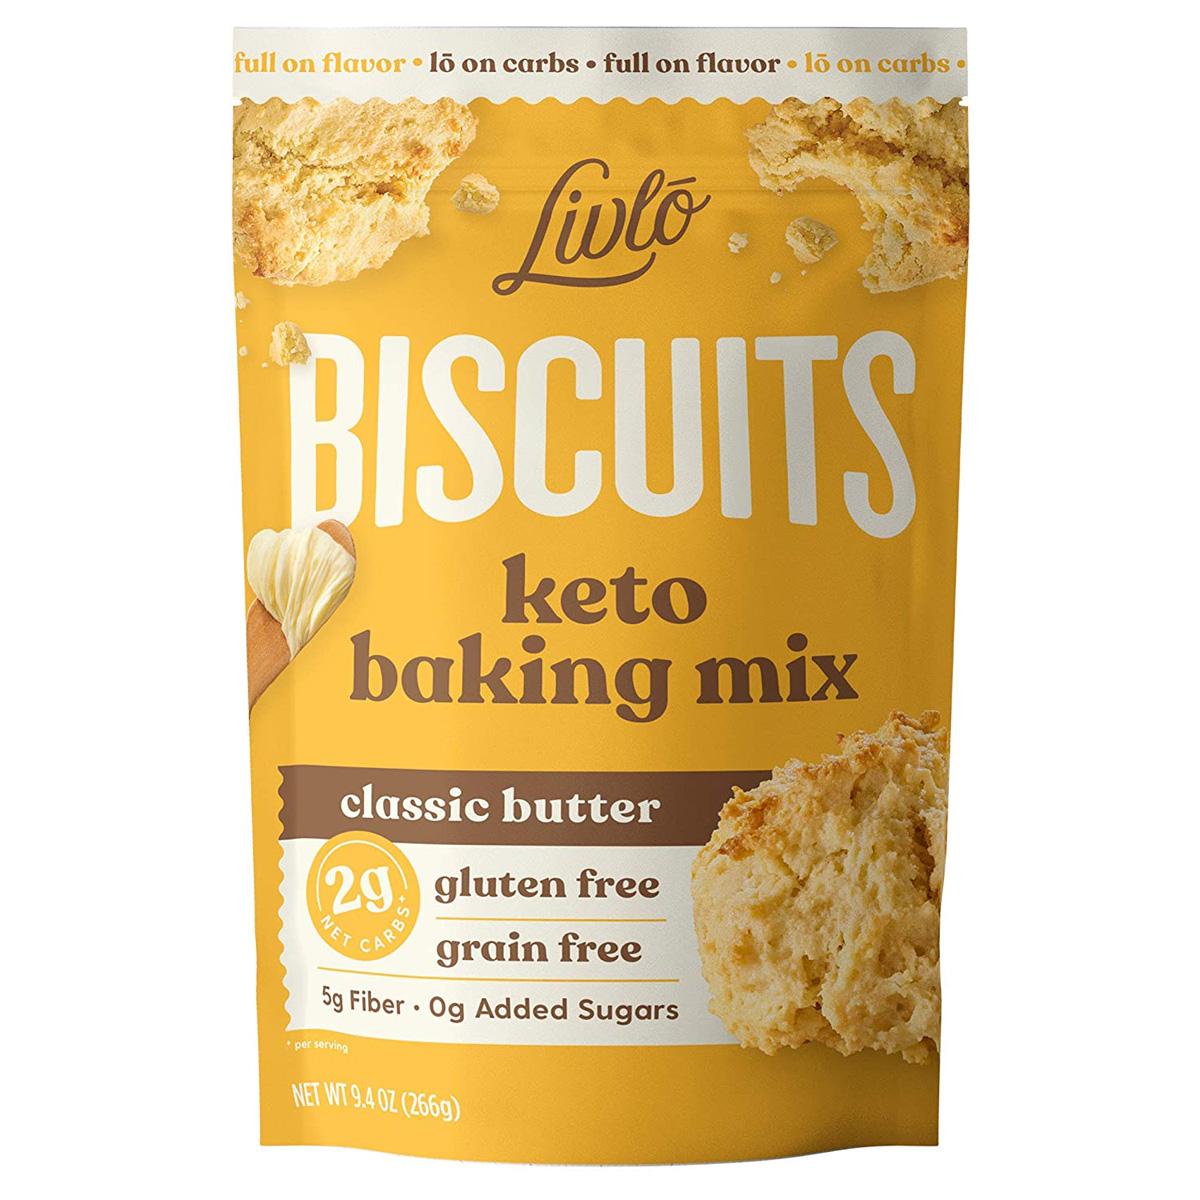 Livlo Keto Biscuit and Bread Mix for $7.30 Shipped